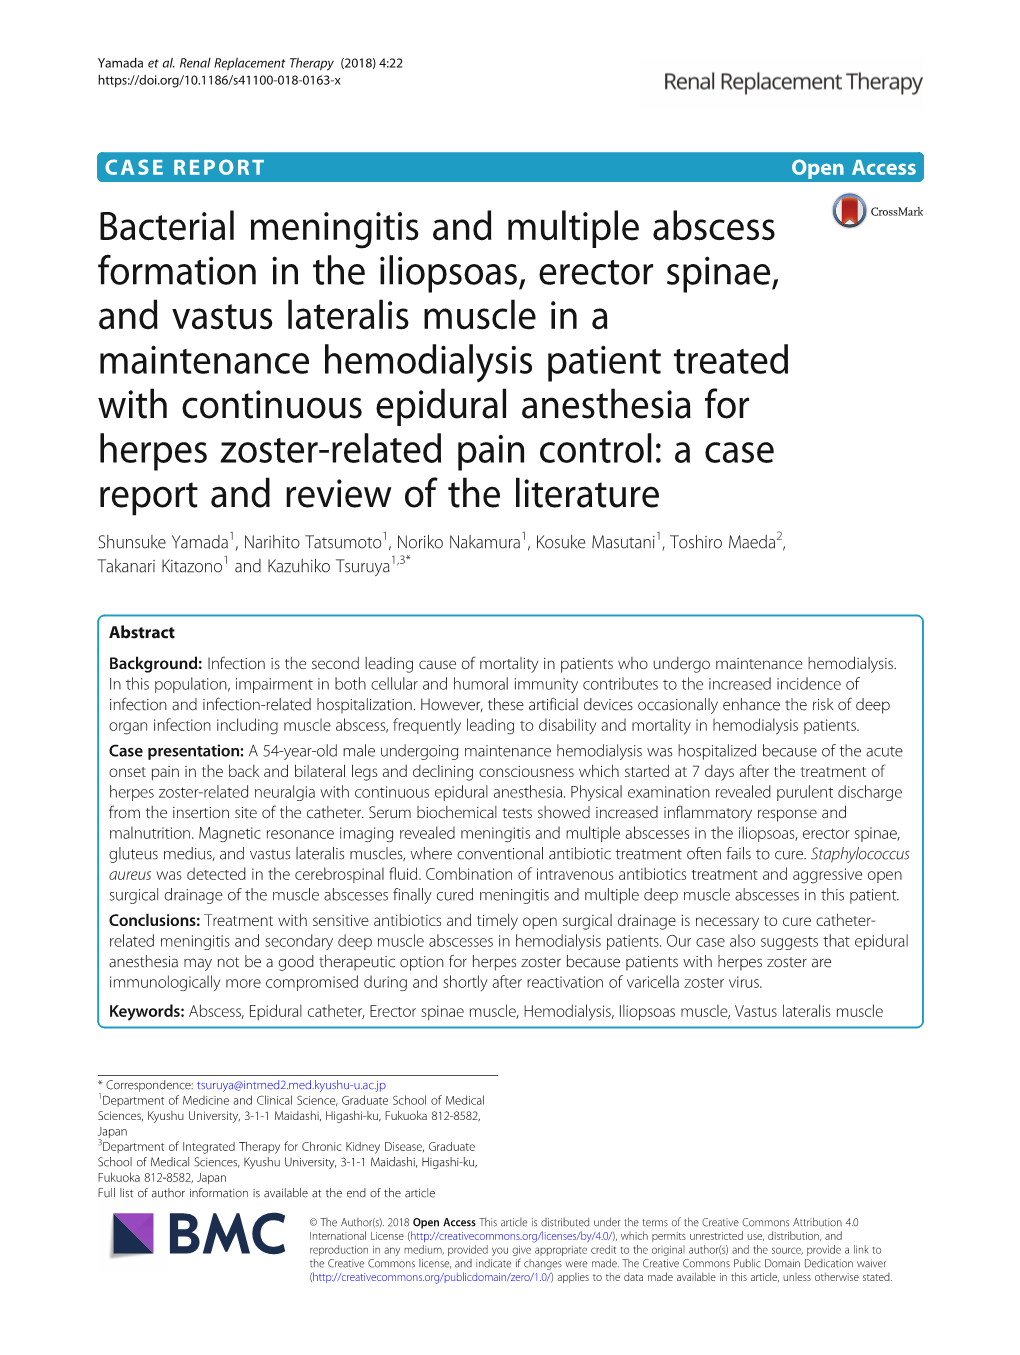 Bacterial Meningitis and Multiple Abscess Formation in the Iliopsoas